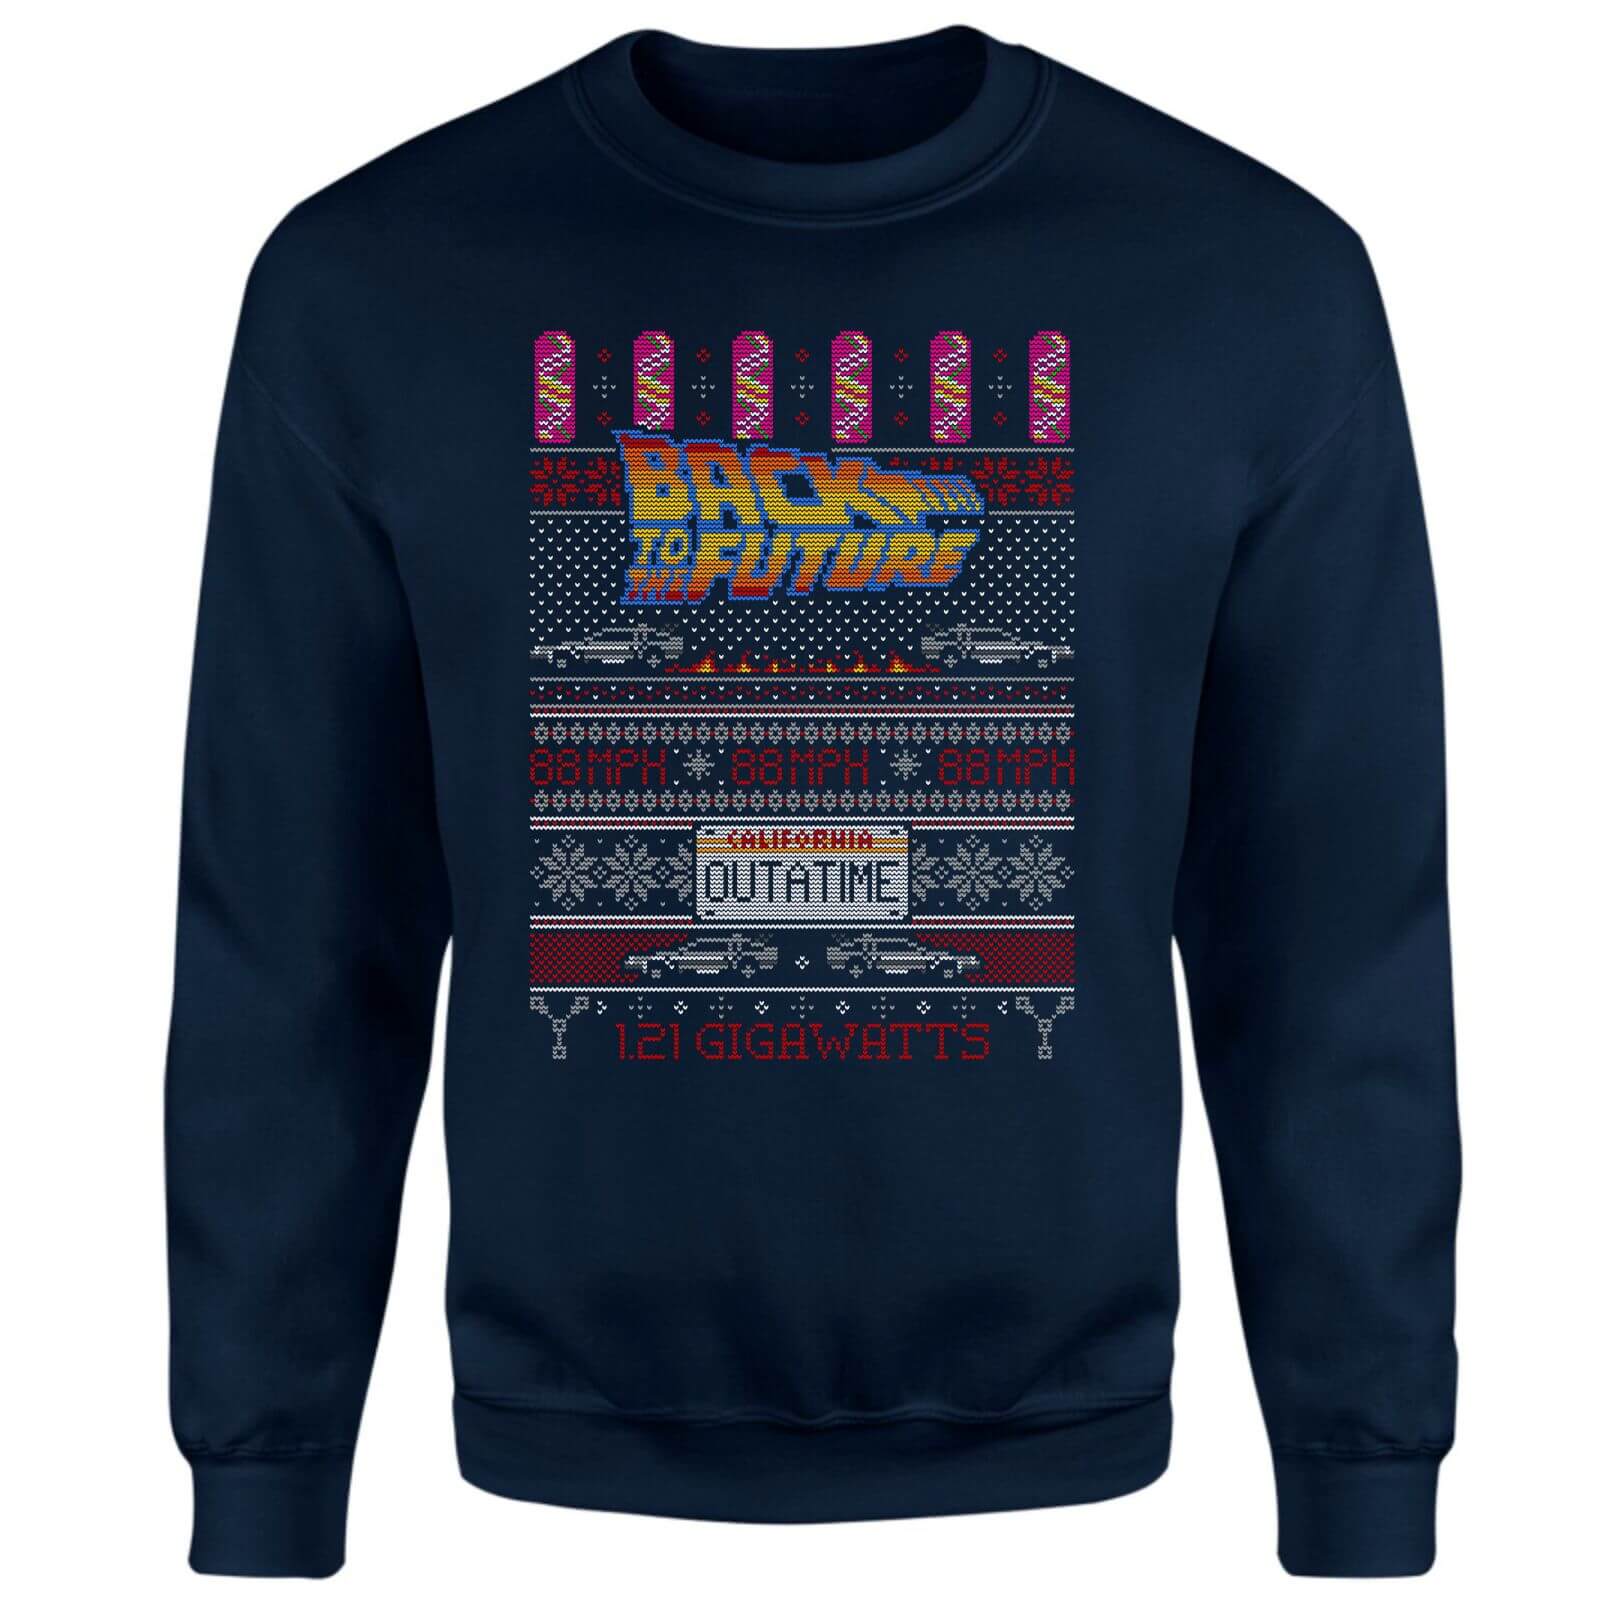 Universal Back To The Future Outa Time Christmas Sweatshirt - Navy - XS - Navy